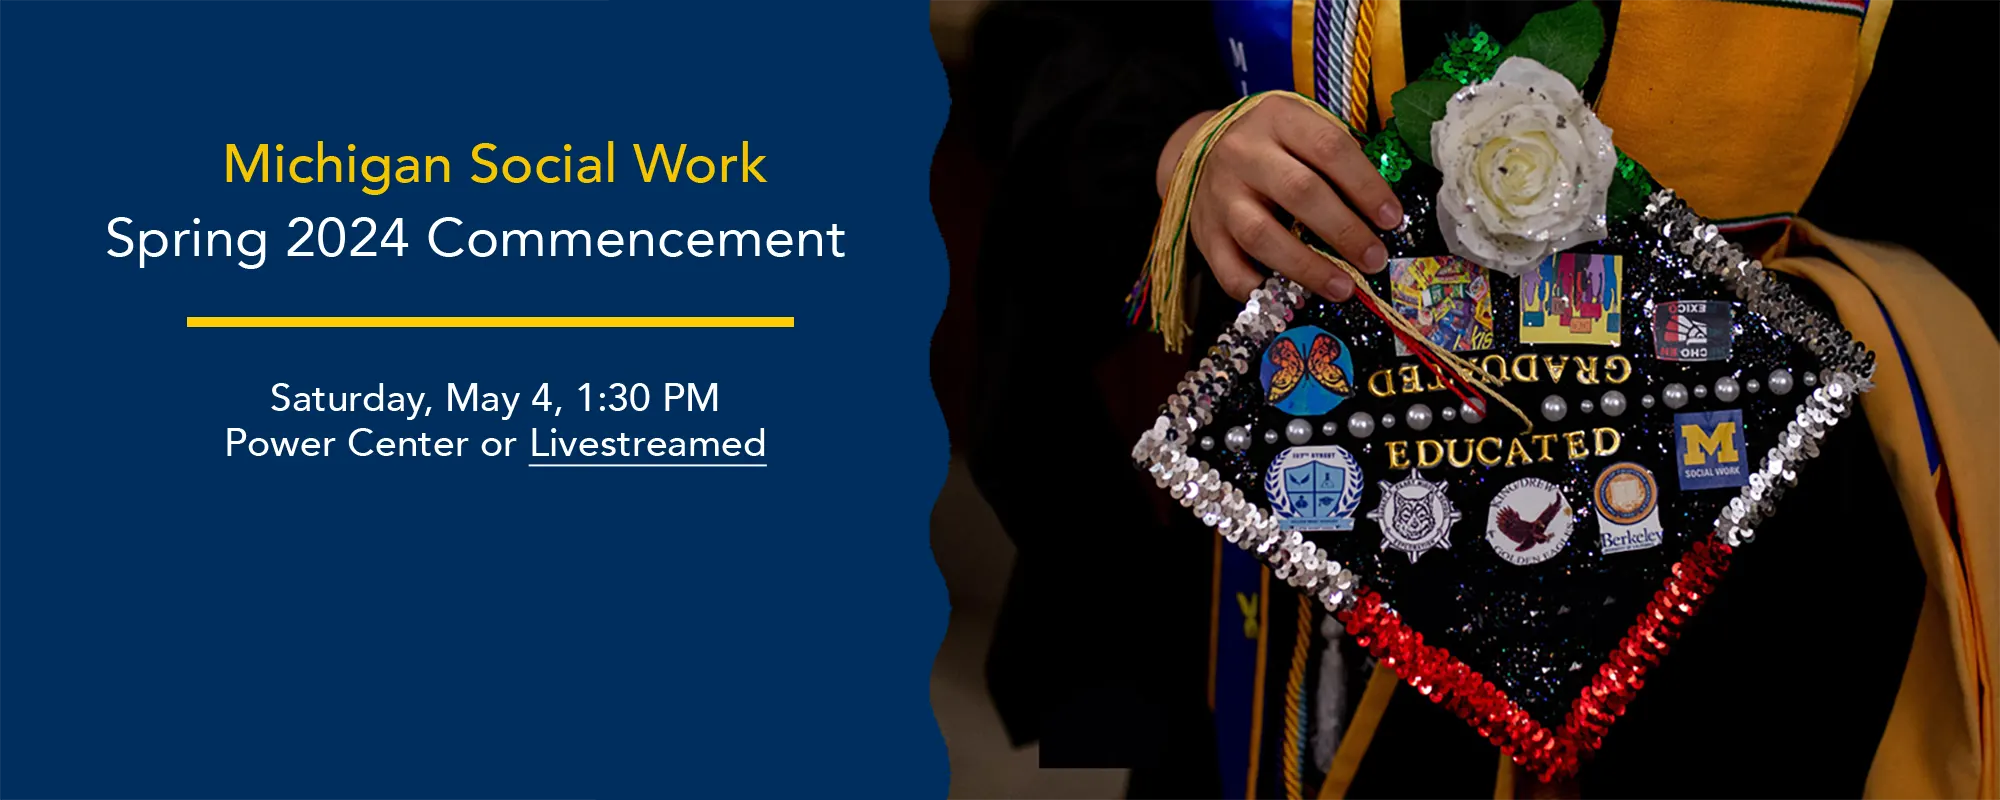 U-M Social Work Spring 2024 Commencement. Saturday, May 4, 1:30 PM Power Center or Livestreamed.